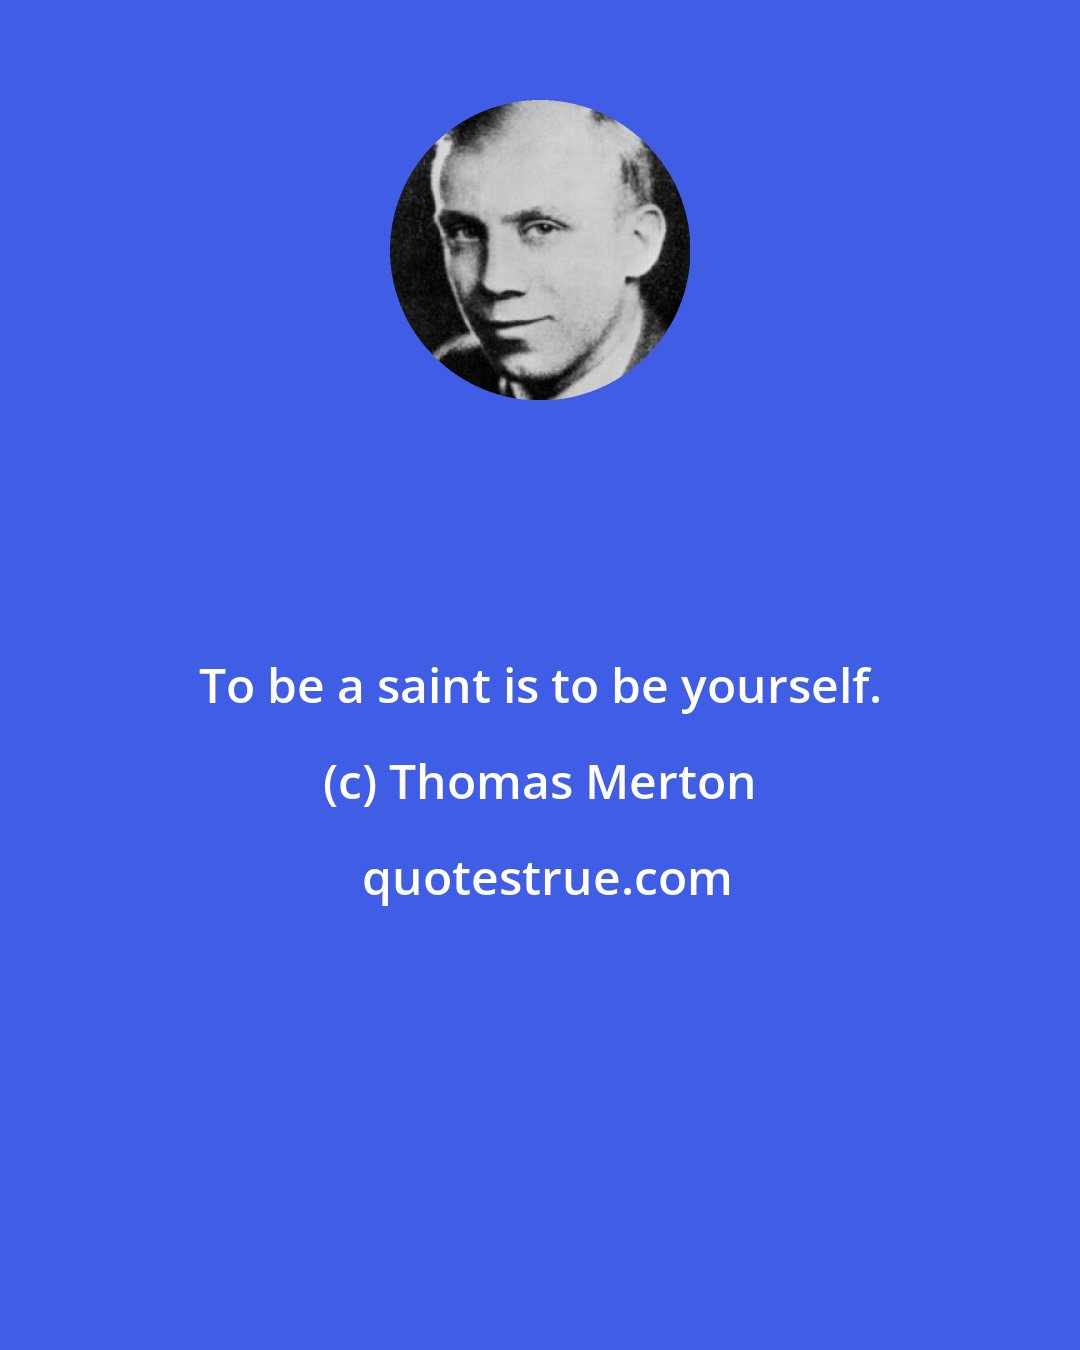 Thomas Merton: To be a saint is to be yourself.